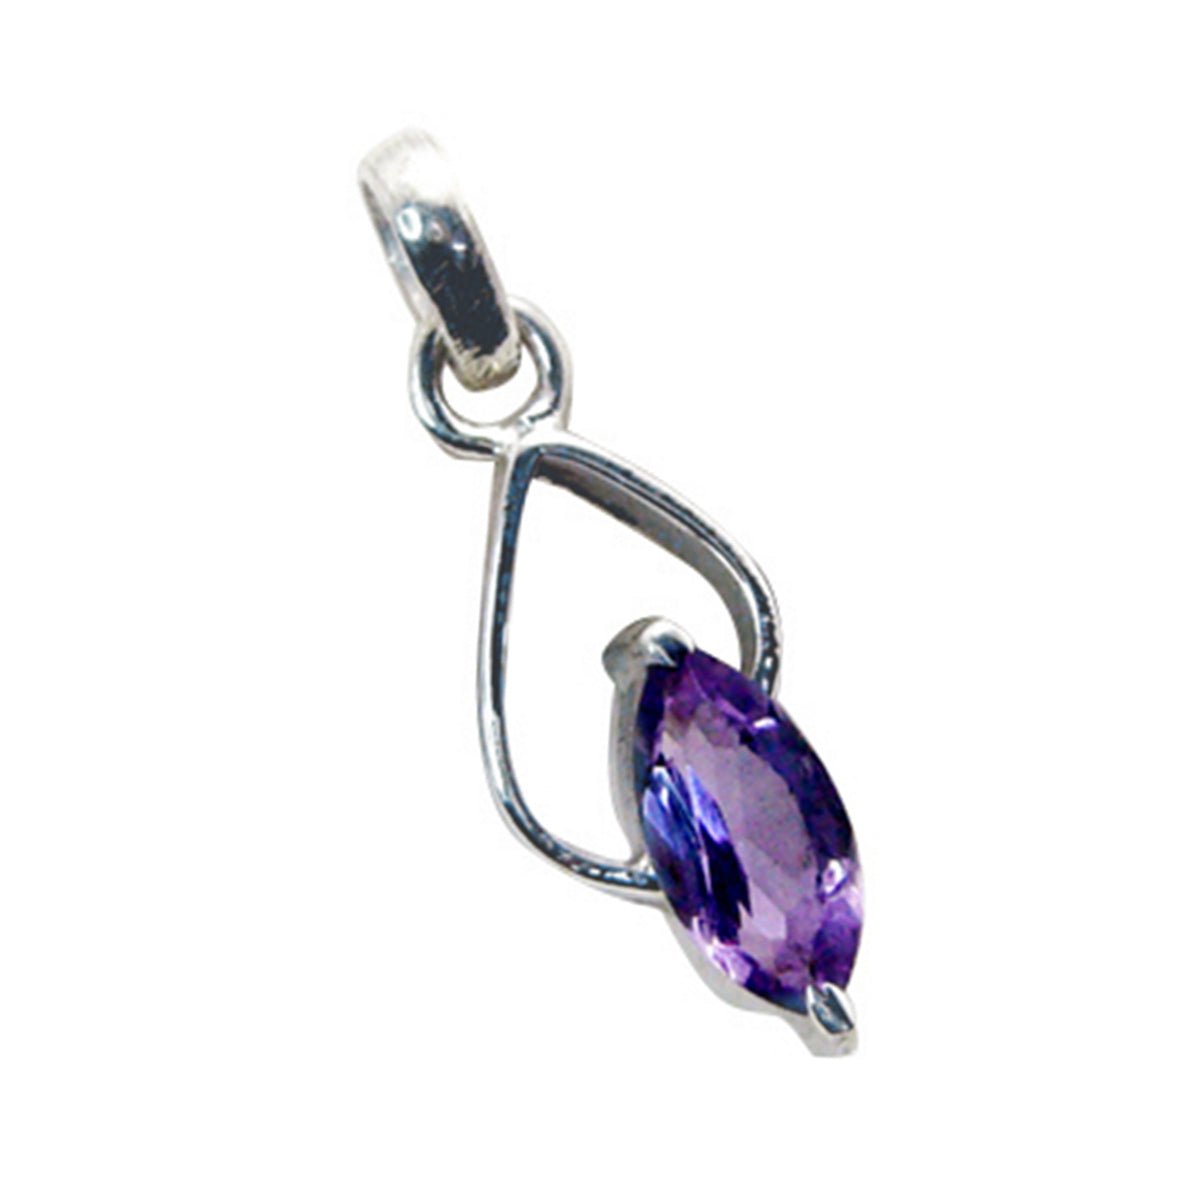 Riyo Graceful Gems Marquise Faceted Purple Amethyst Silver Pendant Gift For Wife